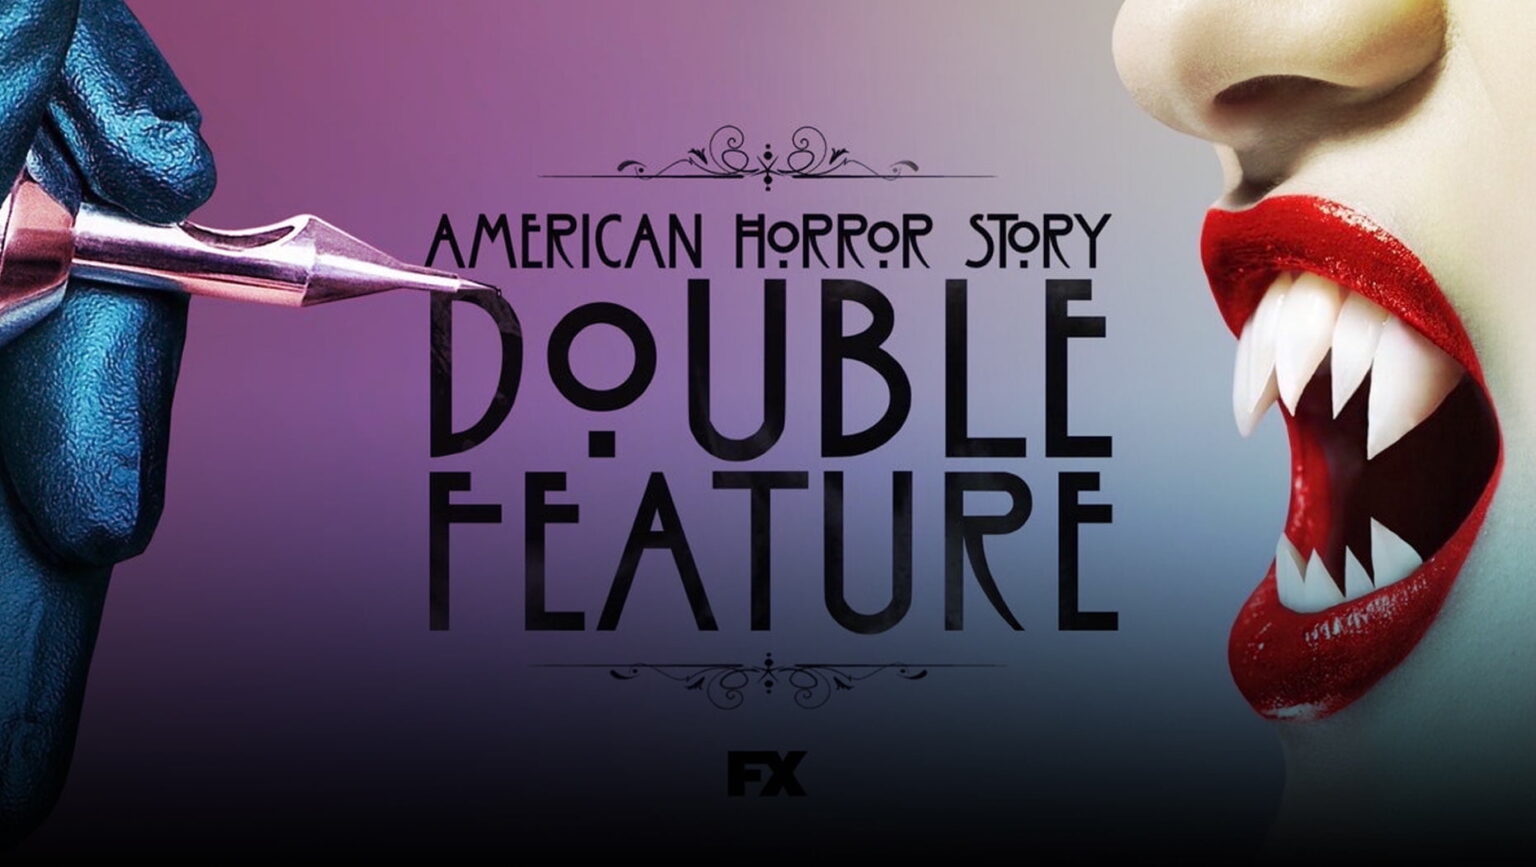 'American Horror Story' is getting a spinoff just in time for this year's spooky season. Meet the new cast of 'American Horror Stories' before it airs.